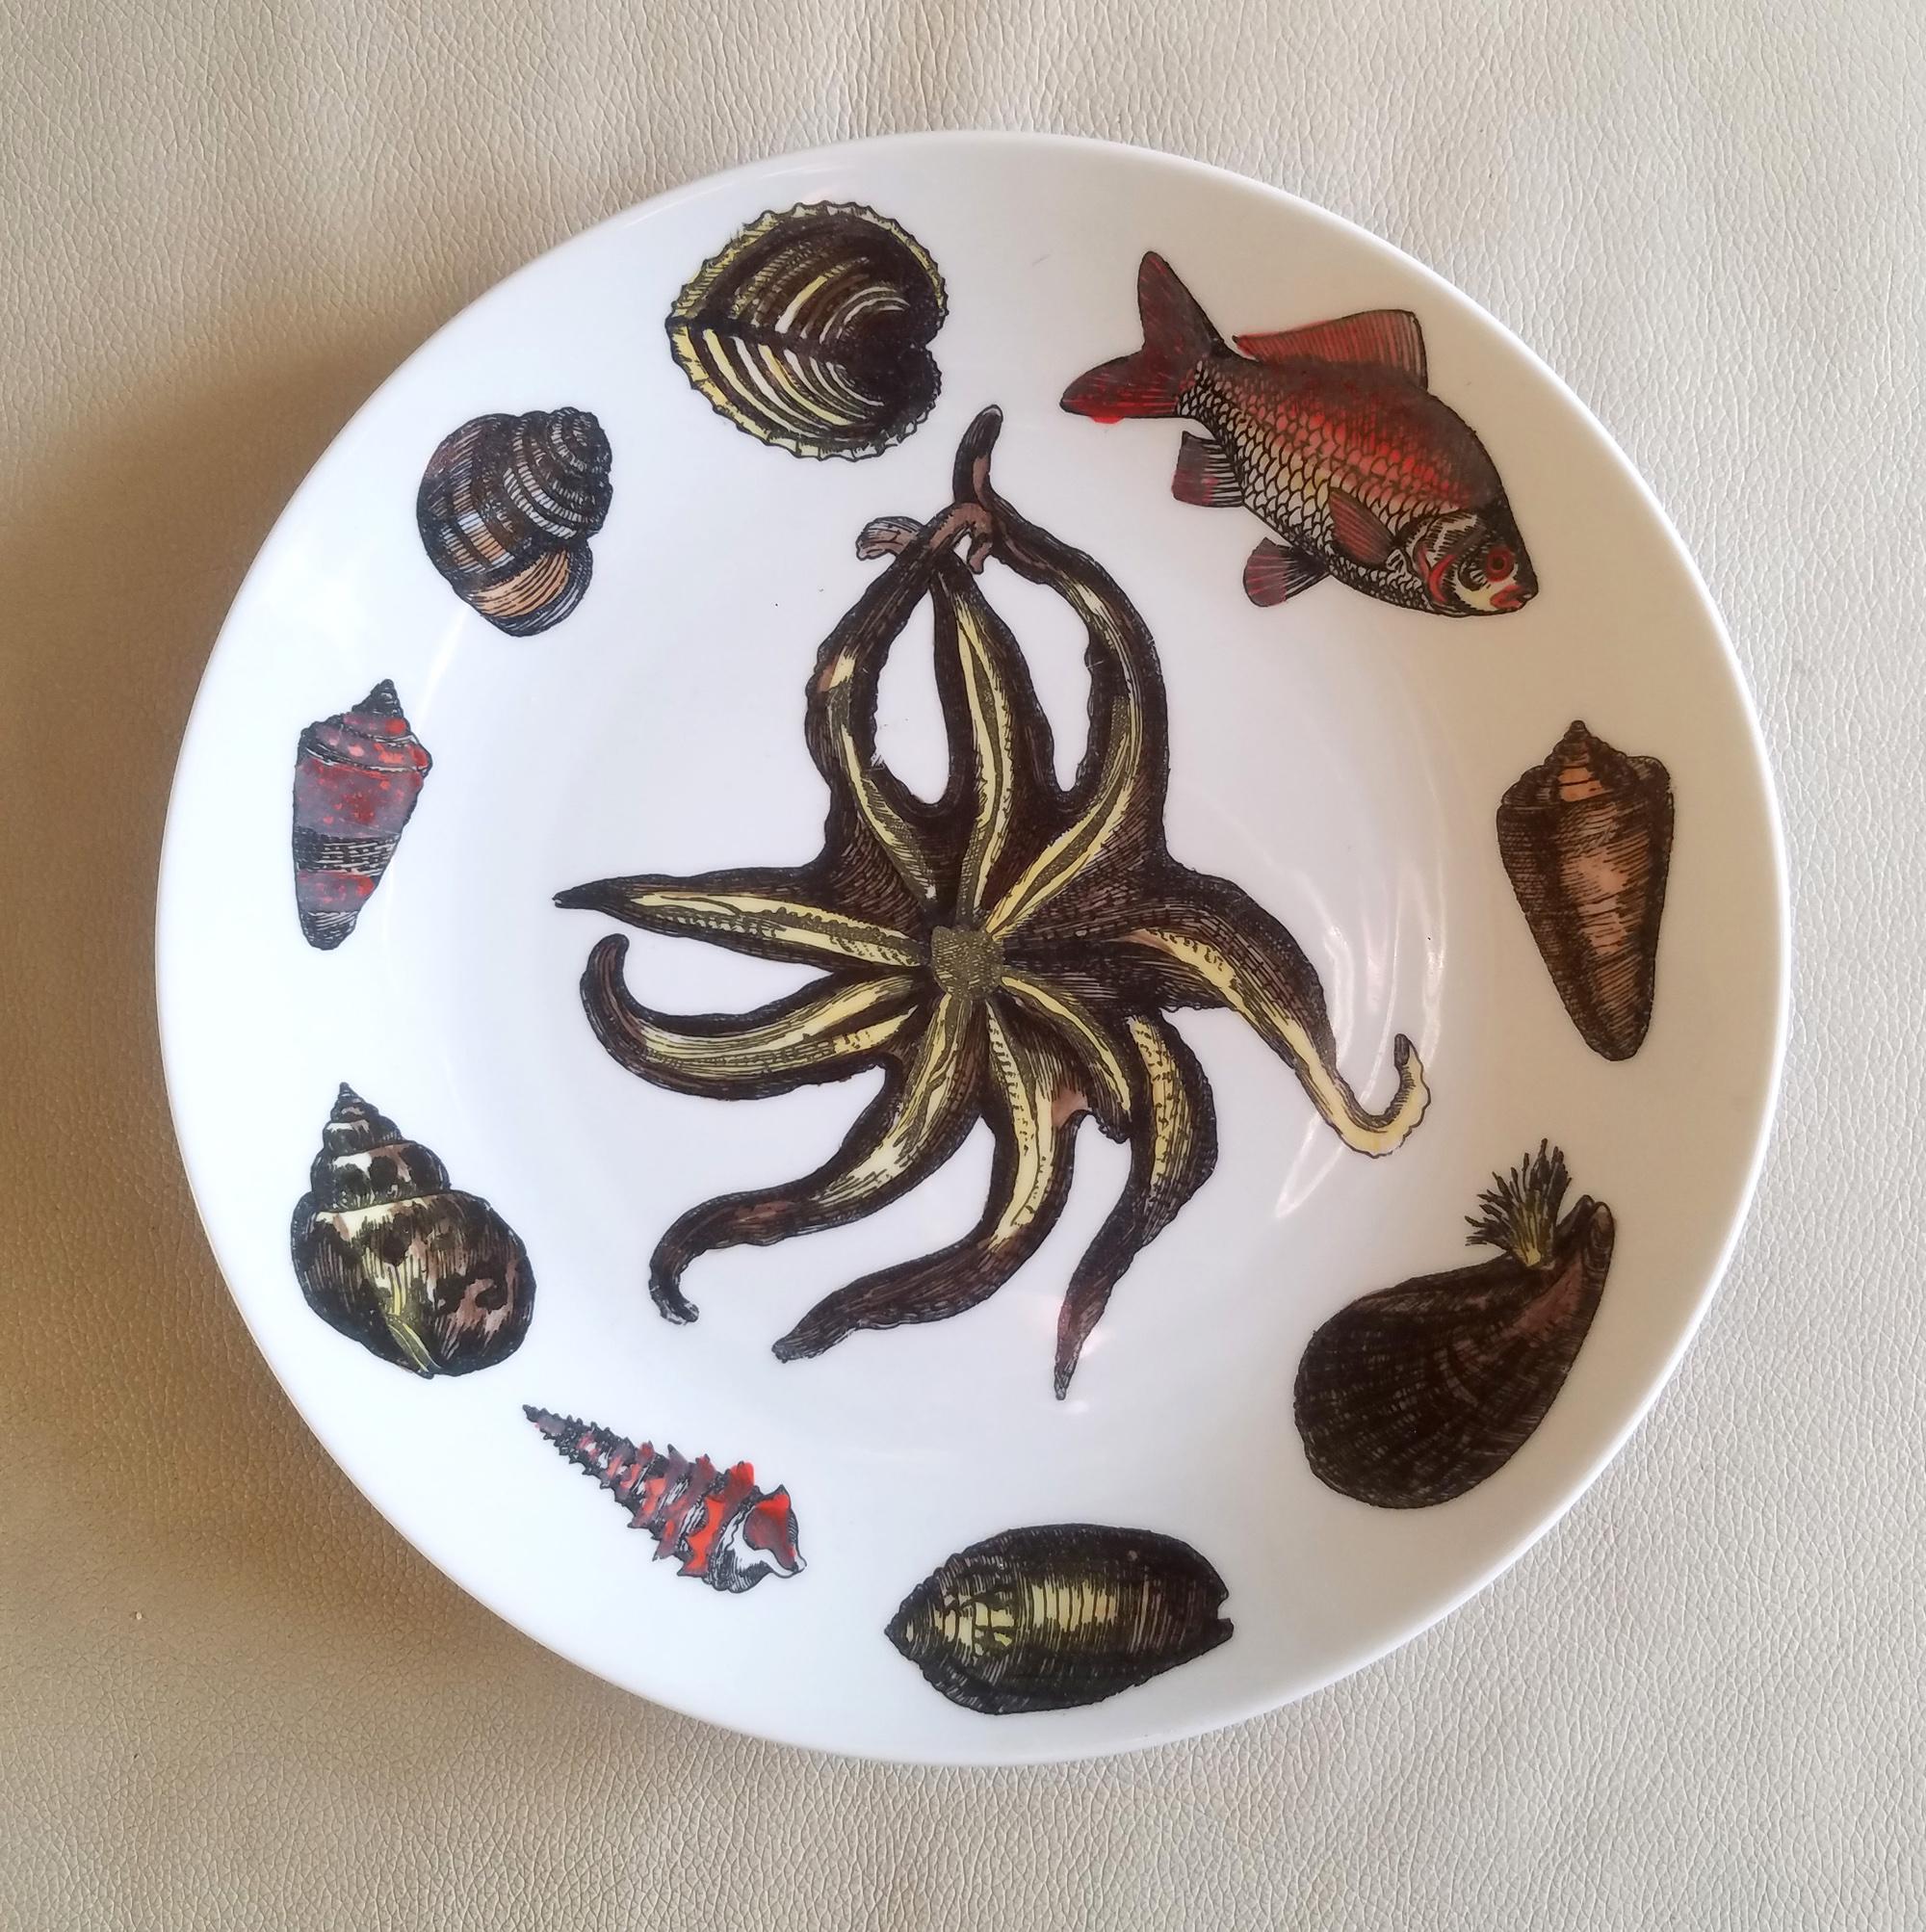 Piero Fornasetti Porcelain Conchiglie Seashell Set of Plates with Mollusks In Good Condition For Sale In Downingtown, PA